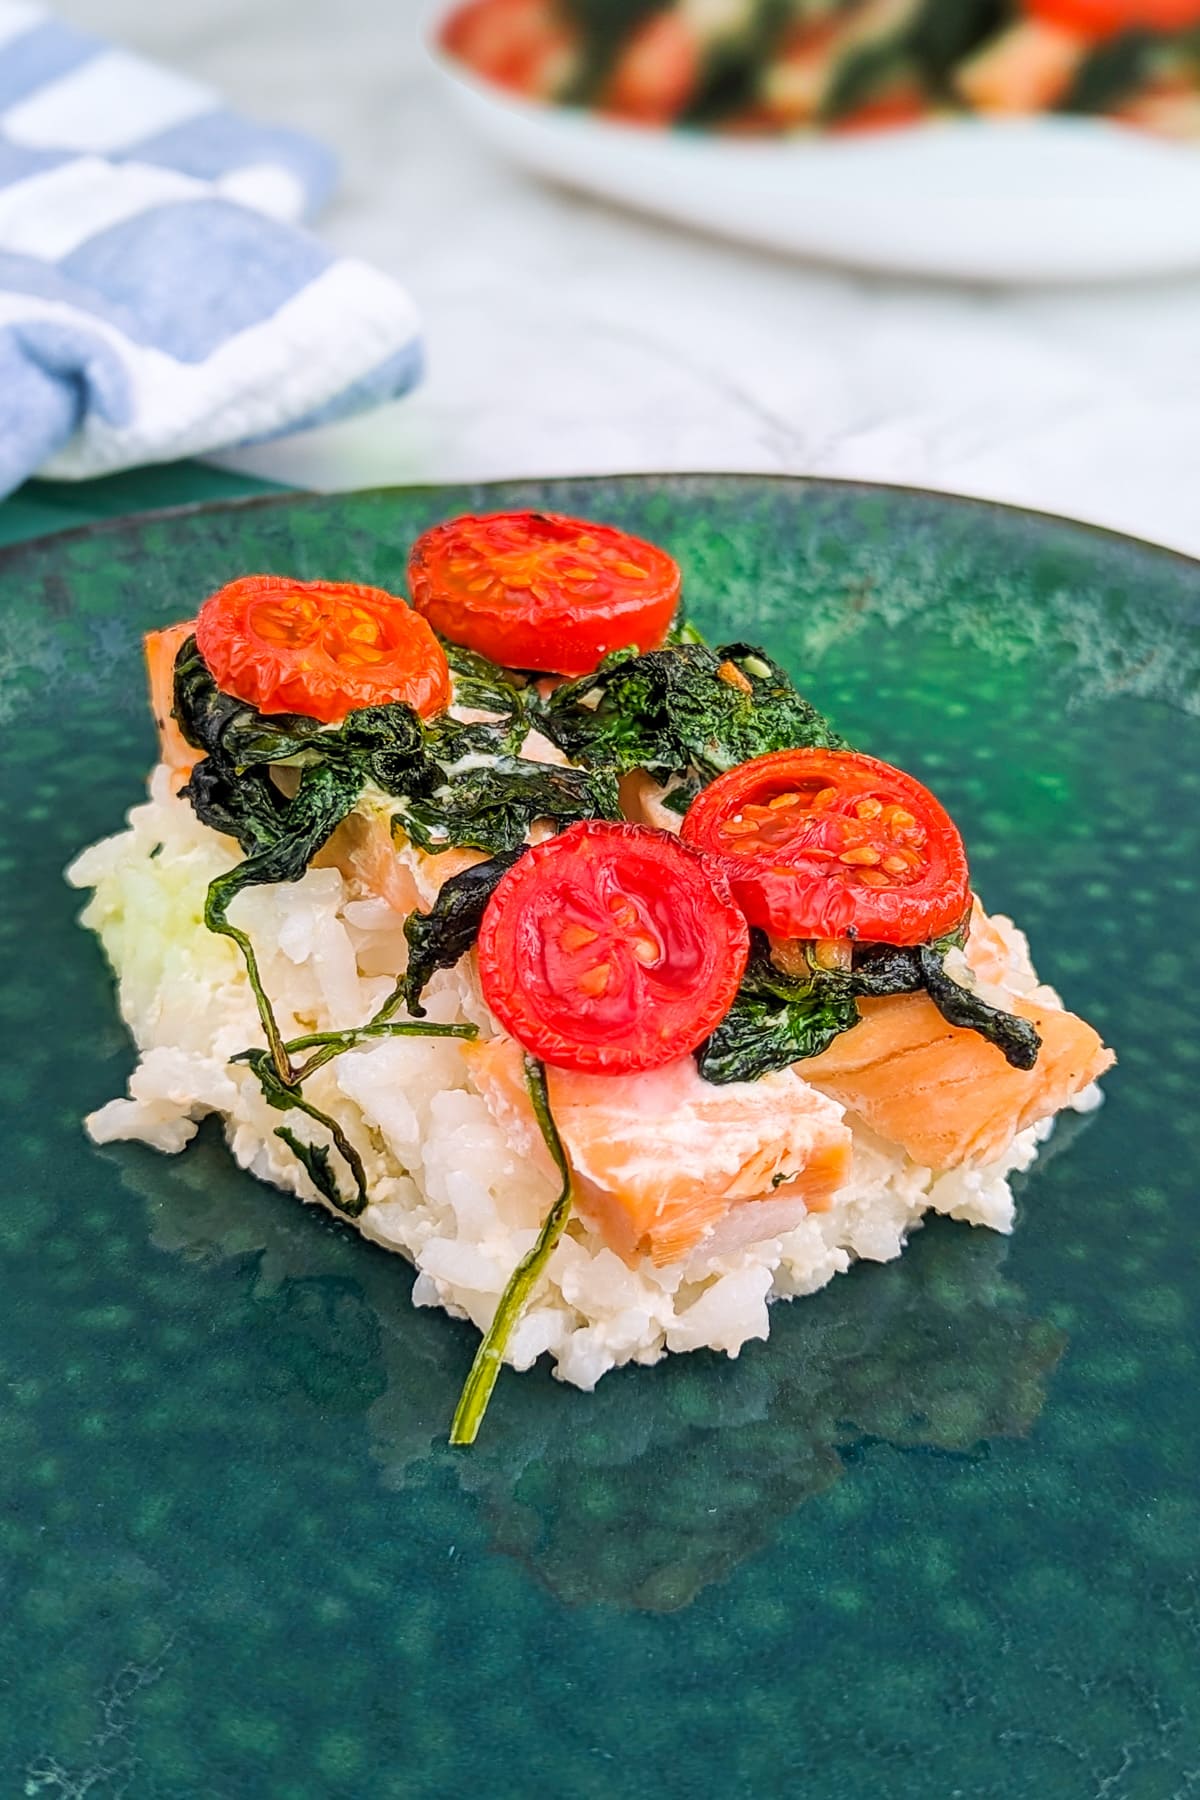 A slice of salmon baked rice with spinach and tomatoes in a green plate.